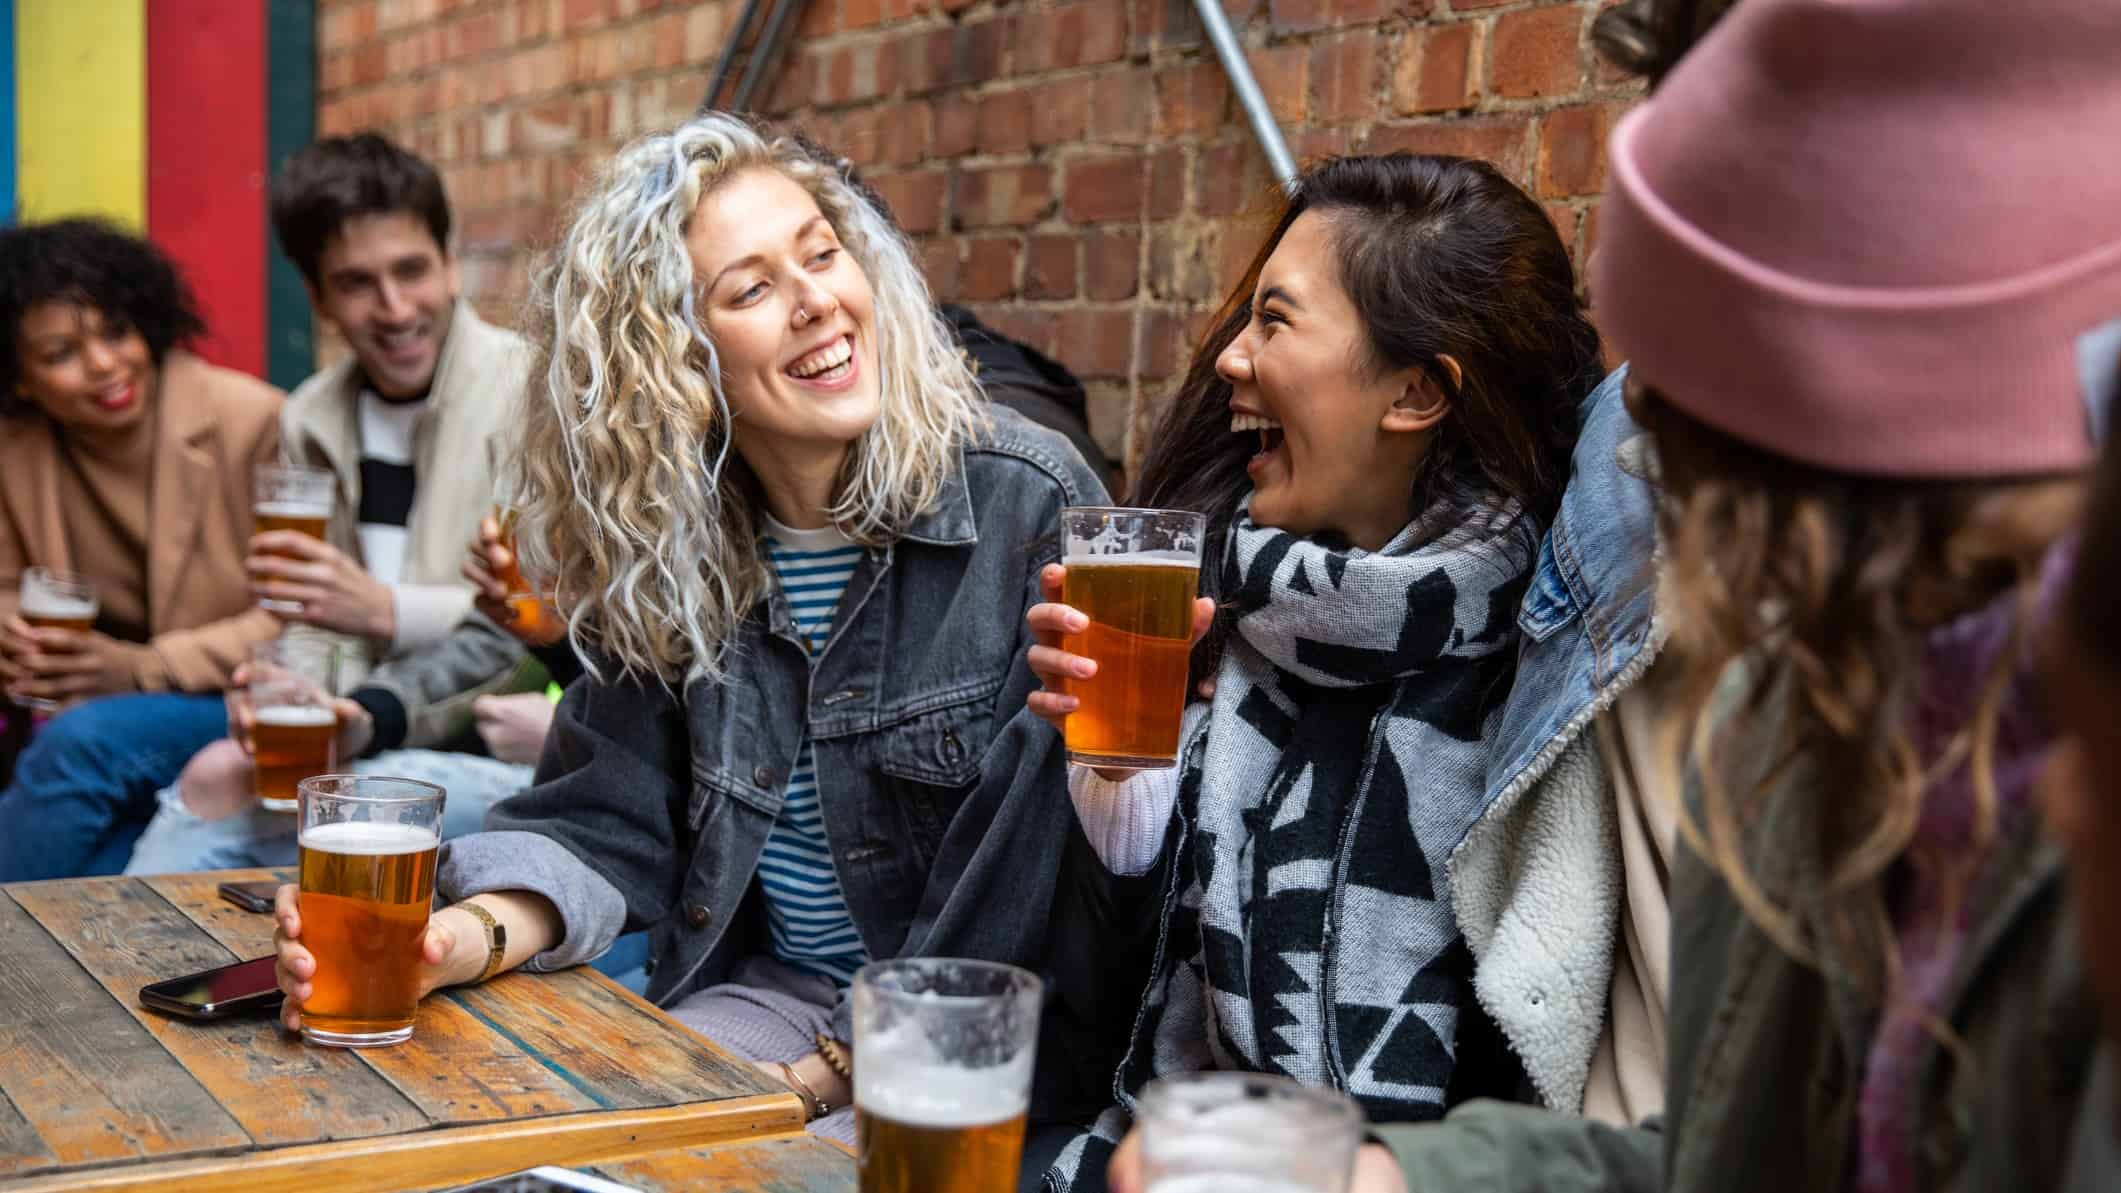 Two female friends laugh while drinking beer at a pub